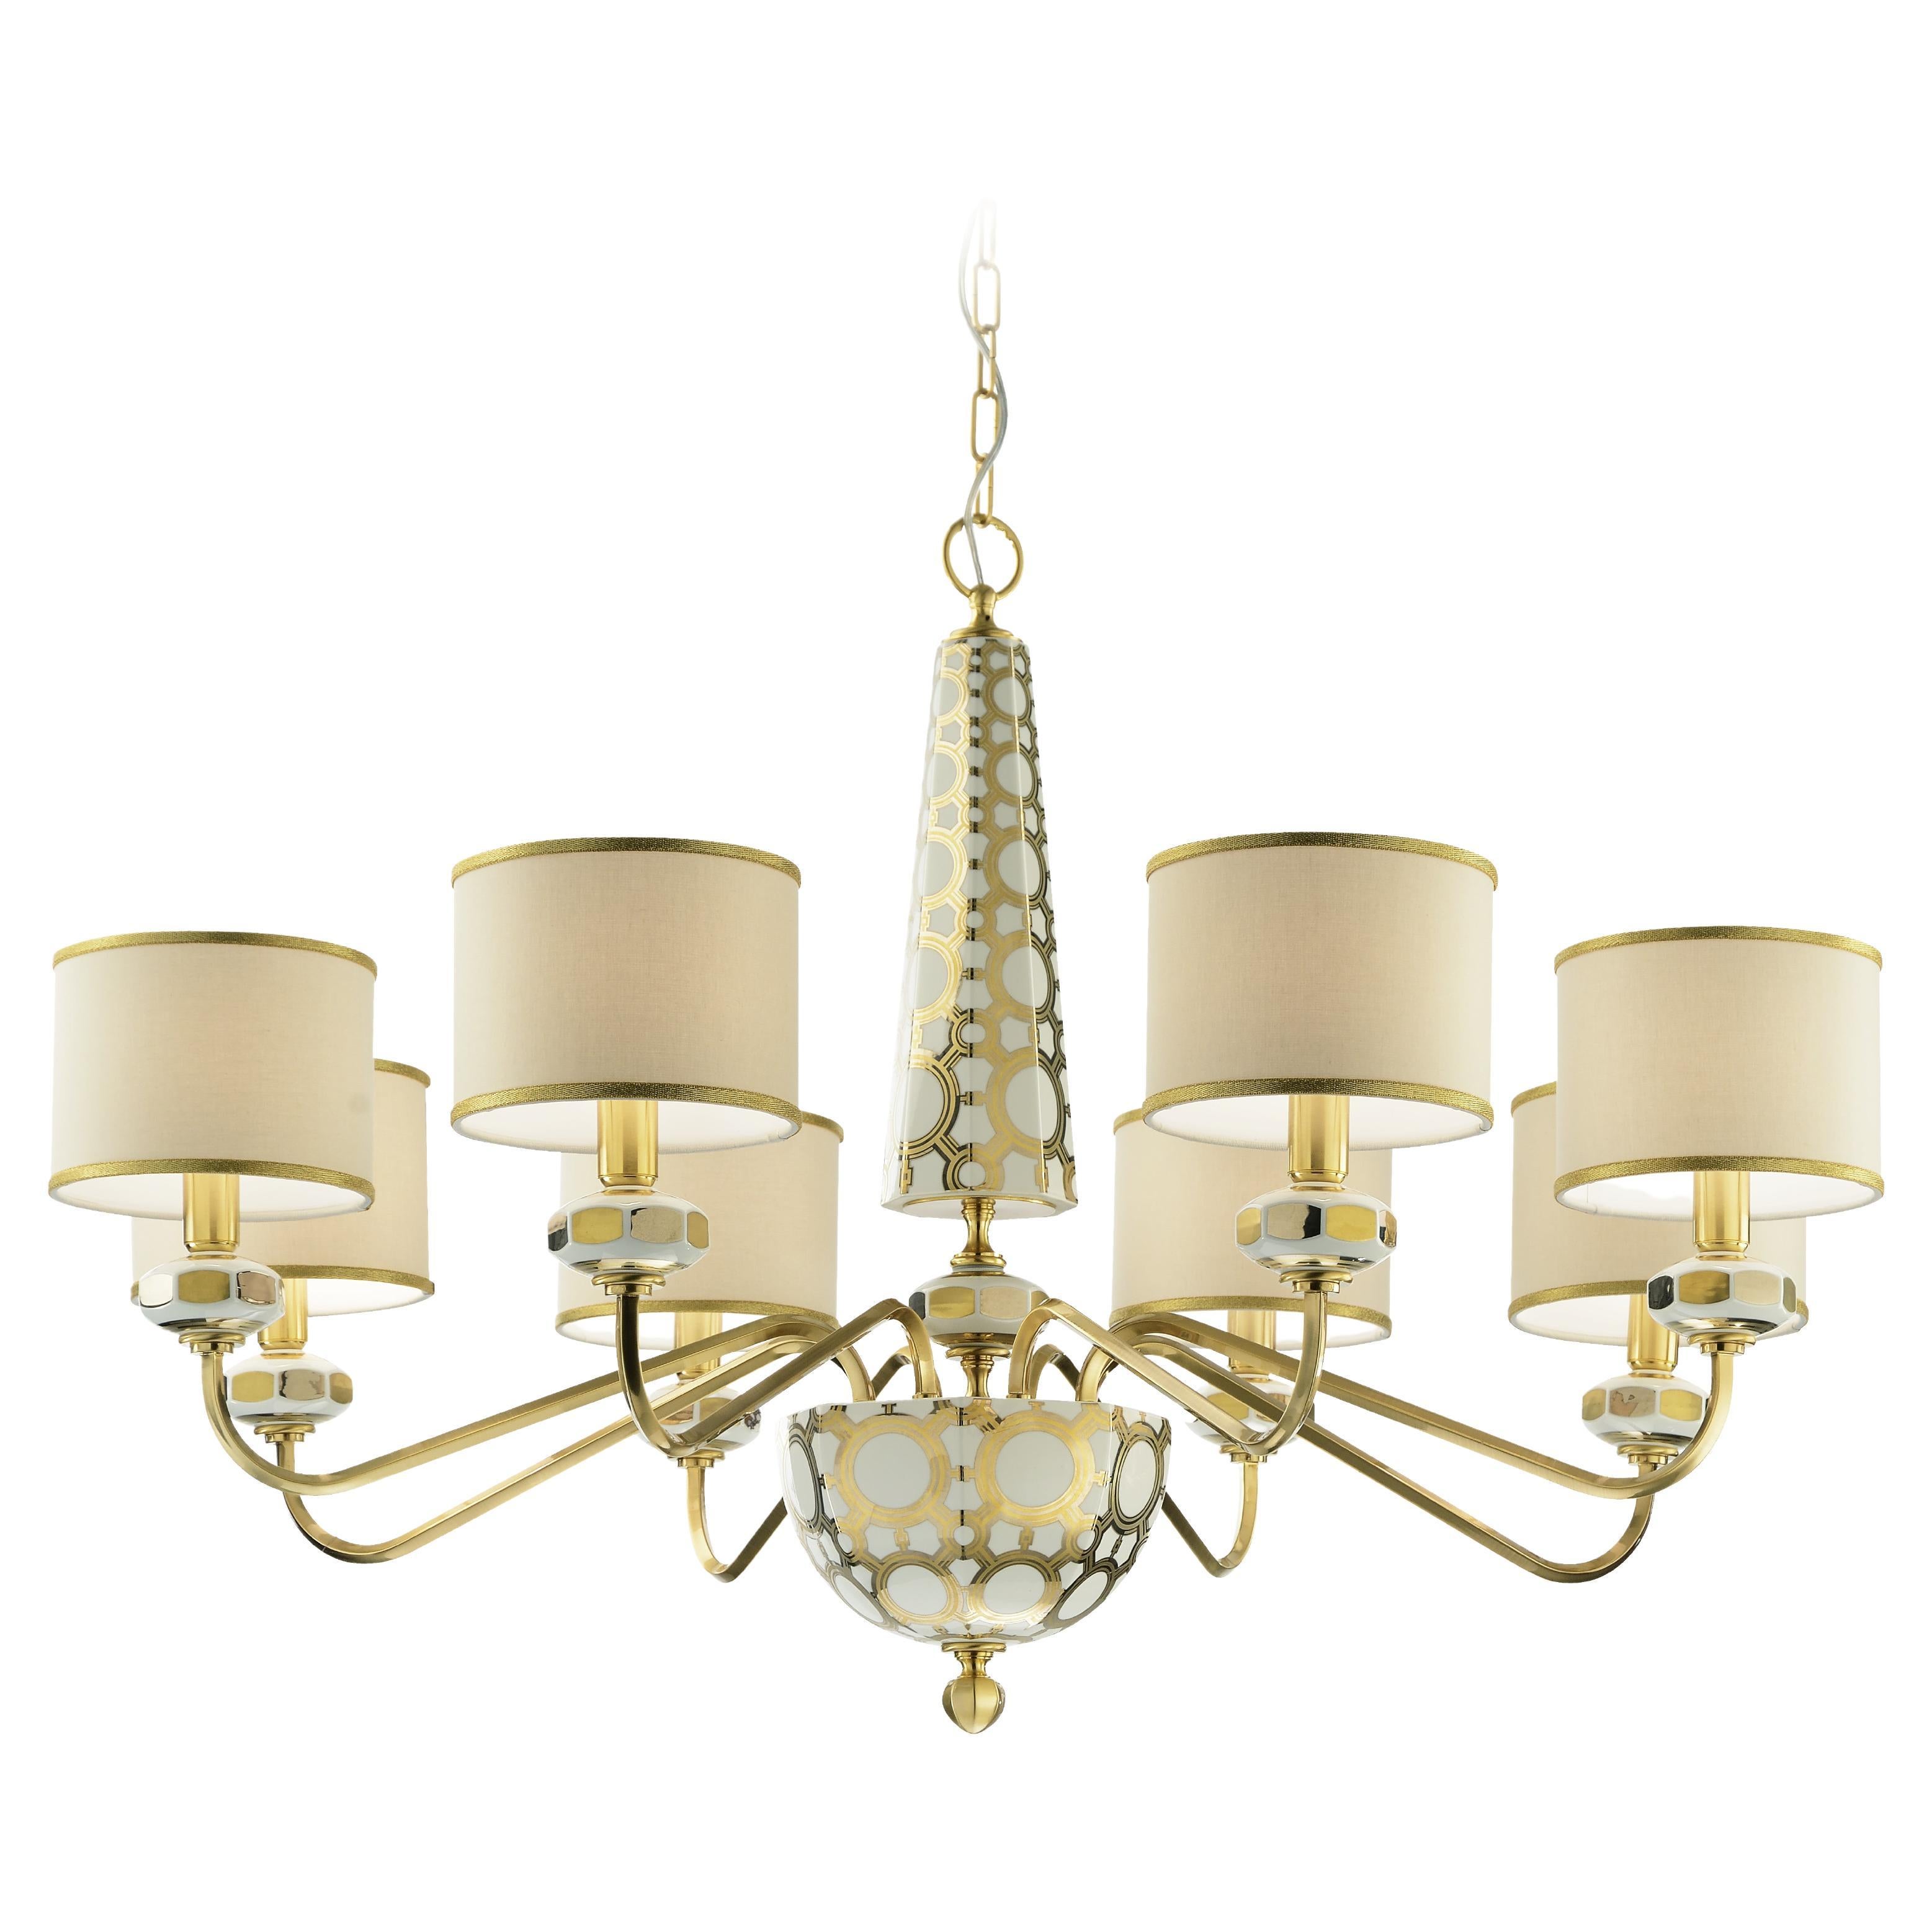 Palazzo Vecchio Collection, 8 Lights Chandelier, Gold and Platinum Decorations For Sale